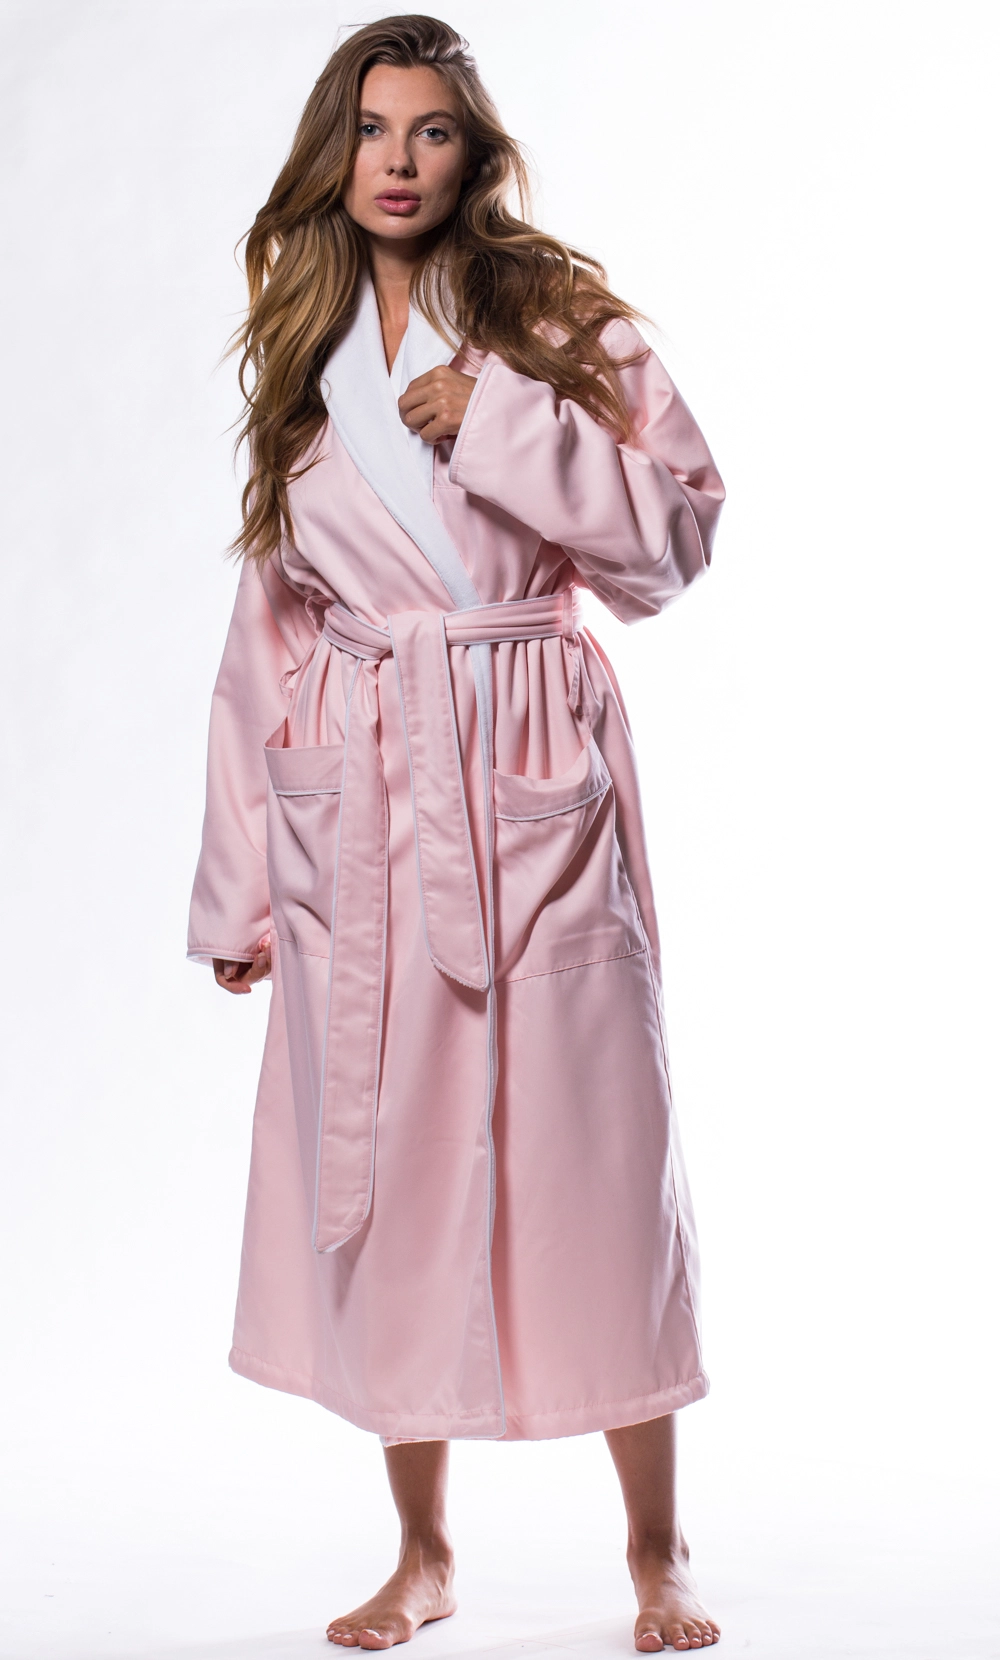 Women's :: Luxury Microfiber Plush Lined Robe Pink - Wholesale bathrobes,  Spa robes, Kids robes, Cotton robes, Spa Slippers, Wholesale Towels